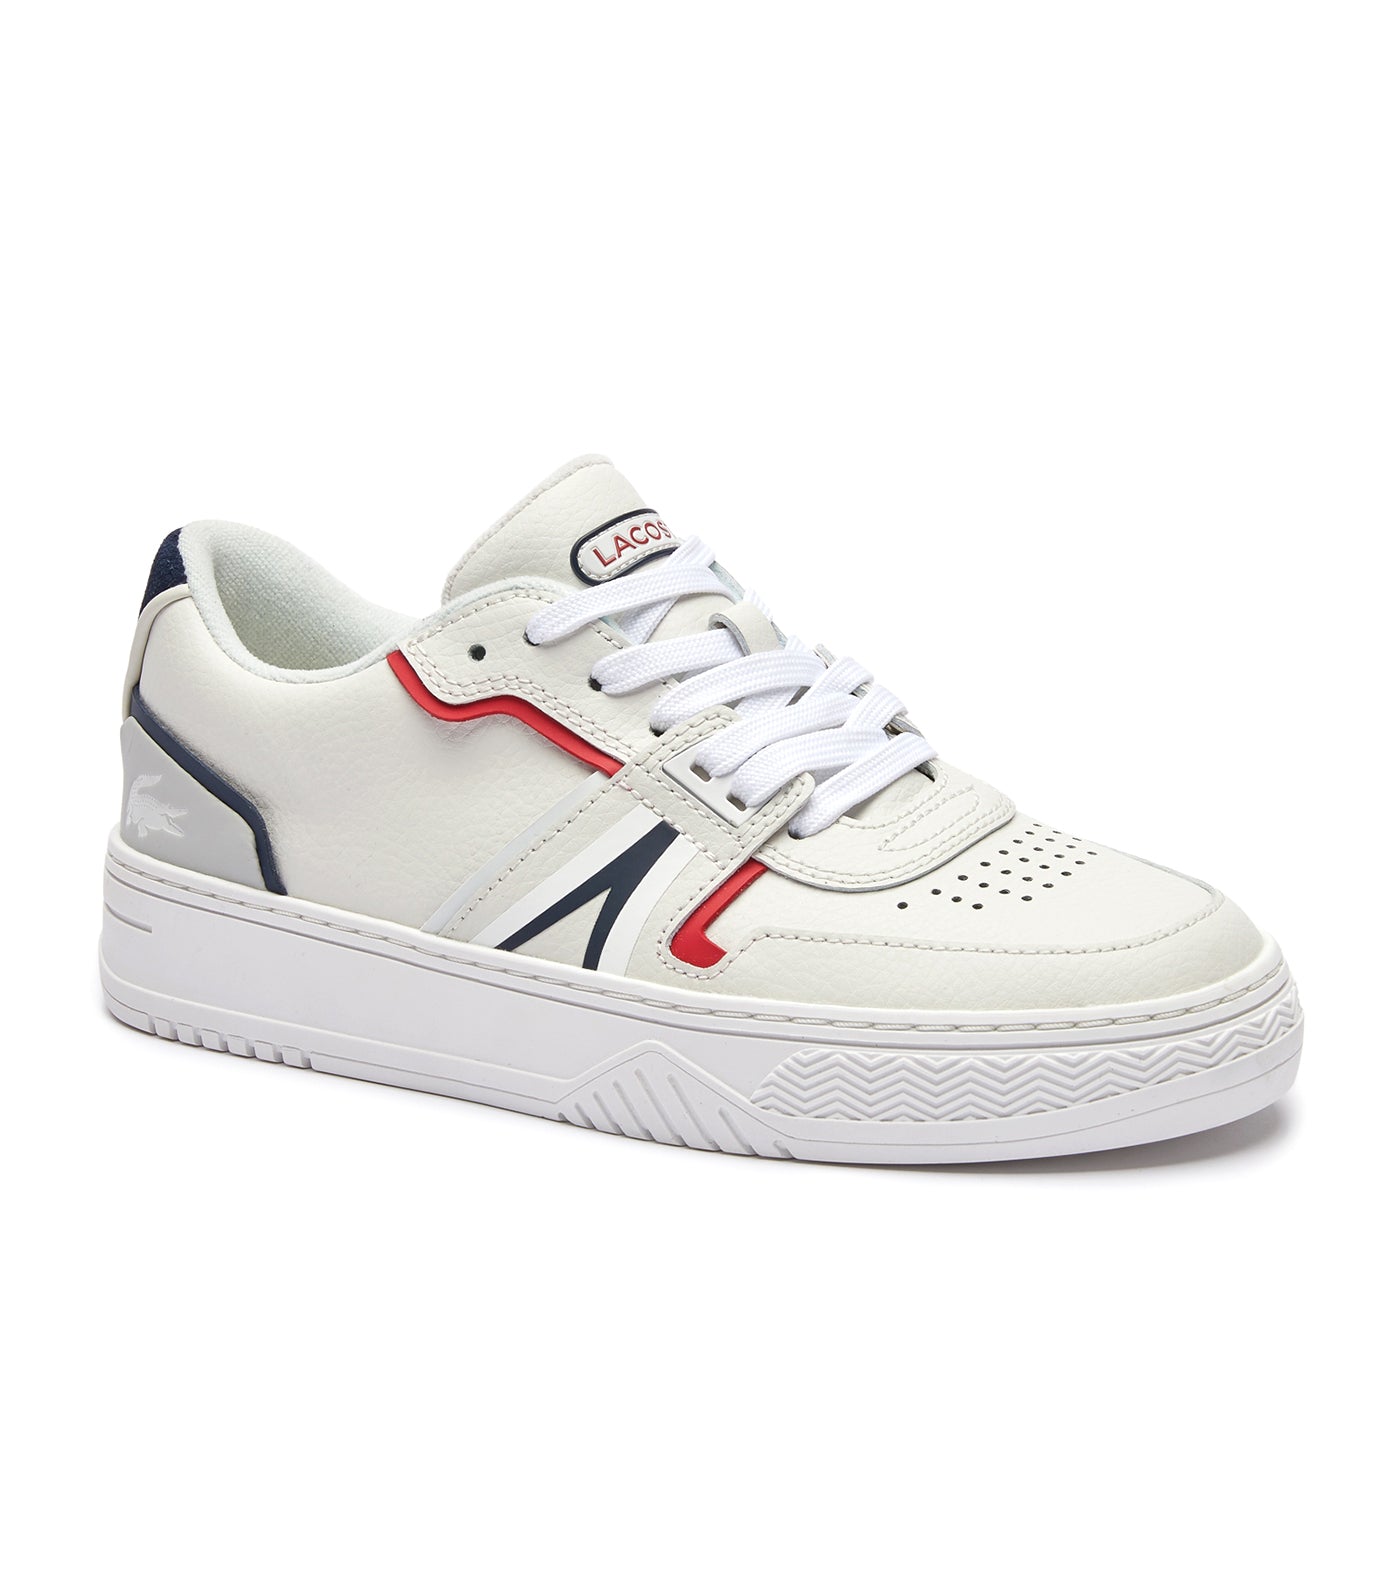 Men's L001 0321 1 Leather Sneakers White/Navy/Red